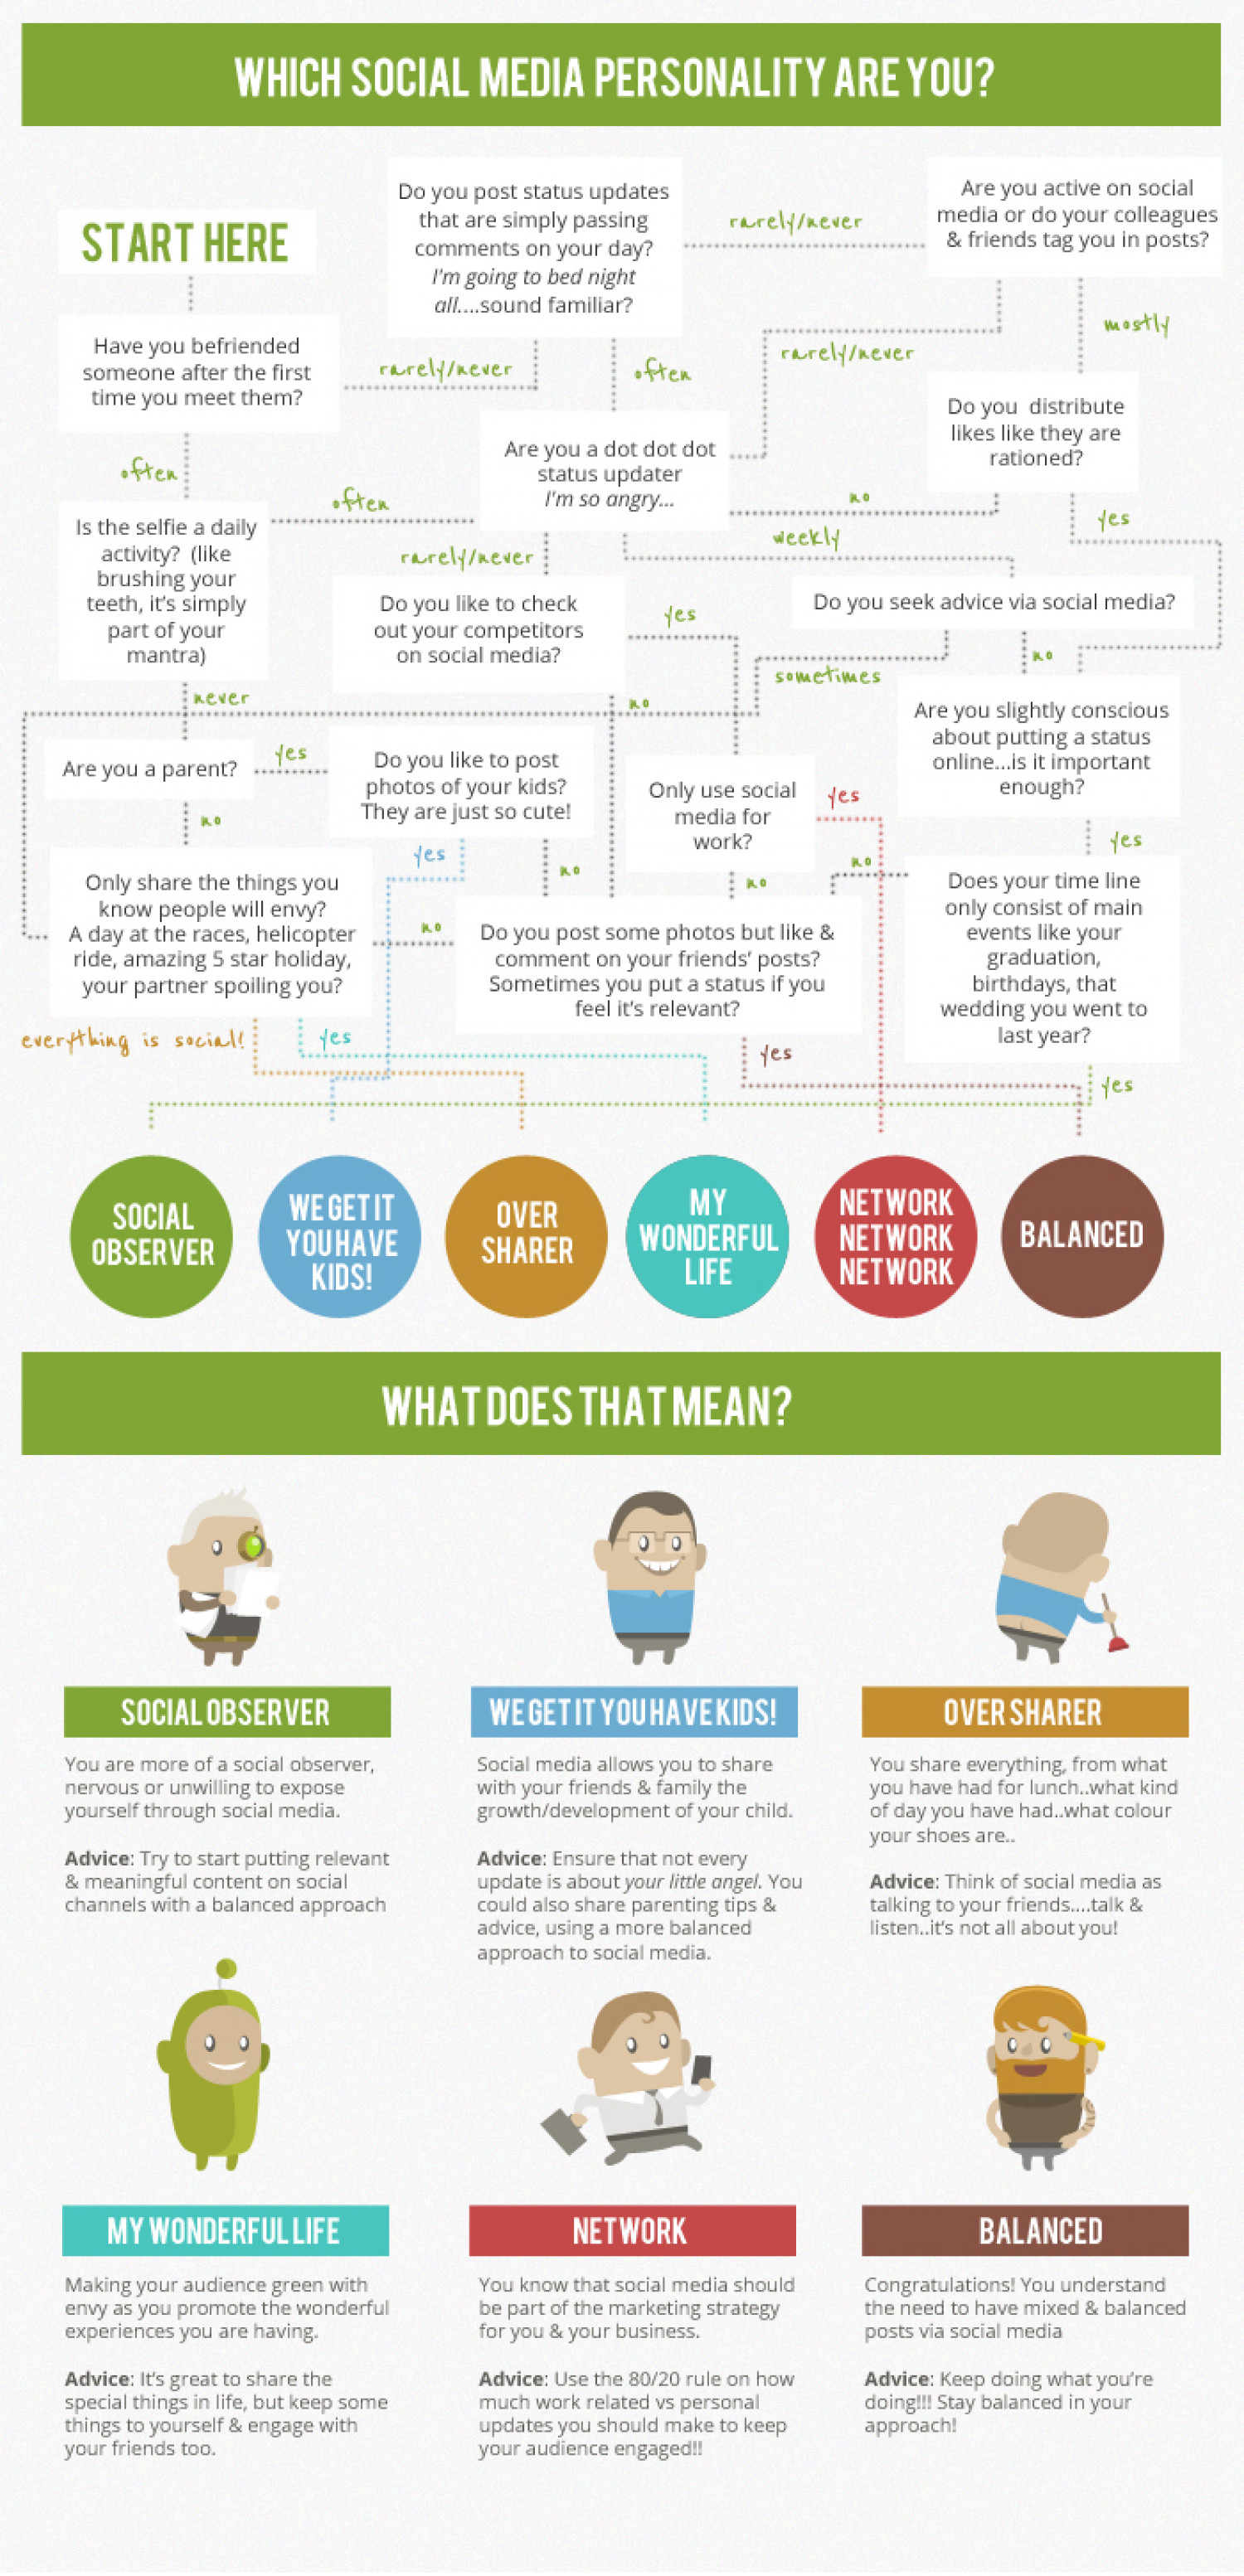 Which Social Media Personality Are You? Infographic